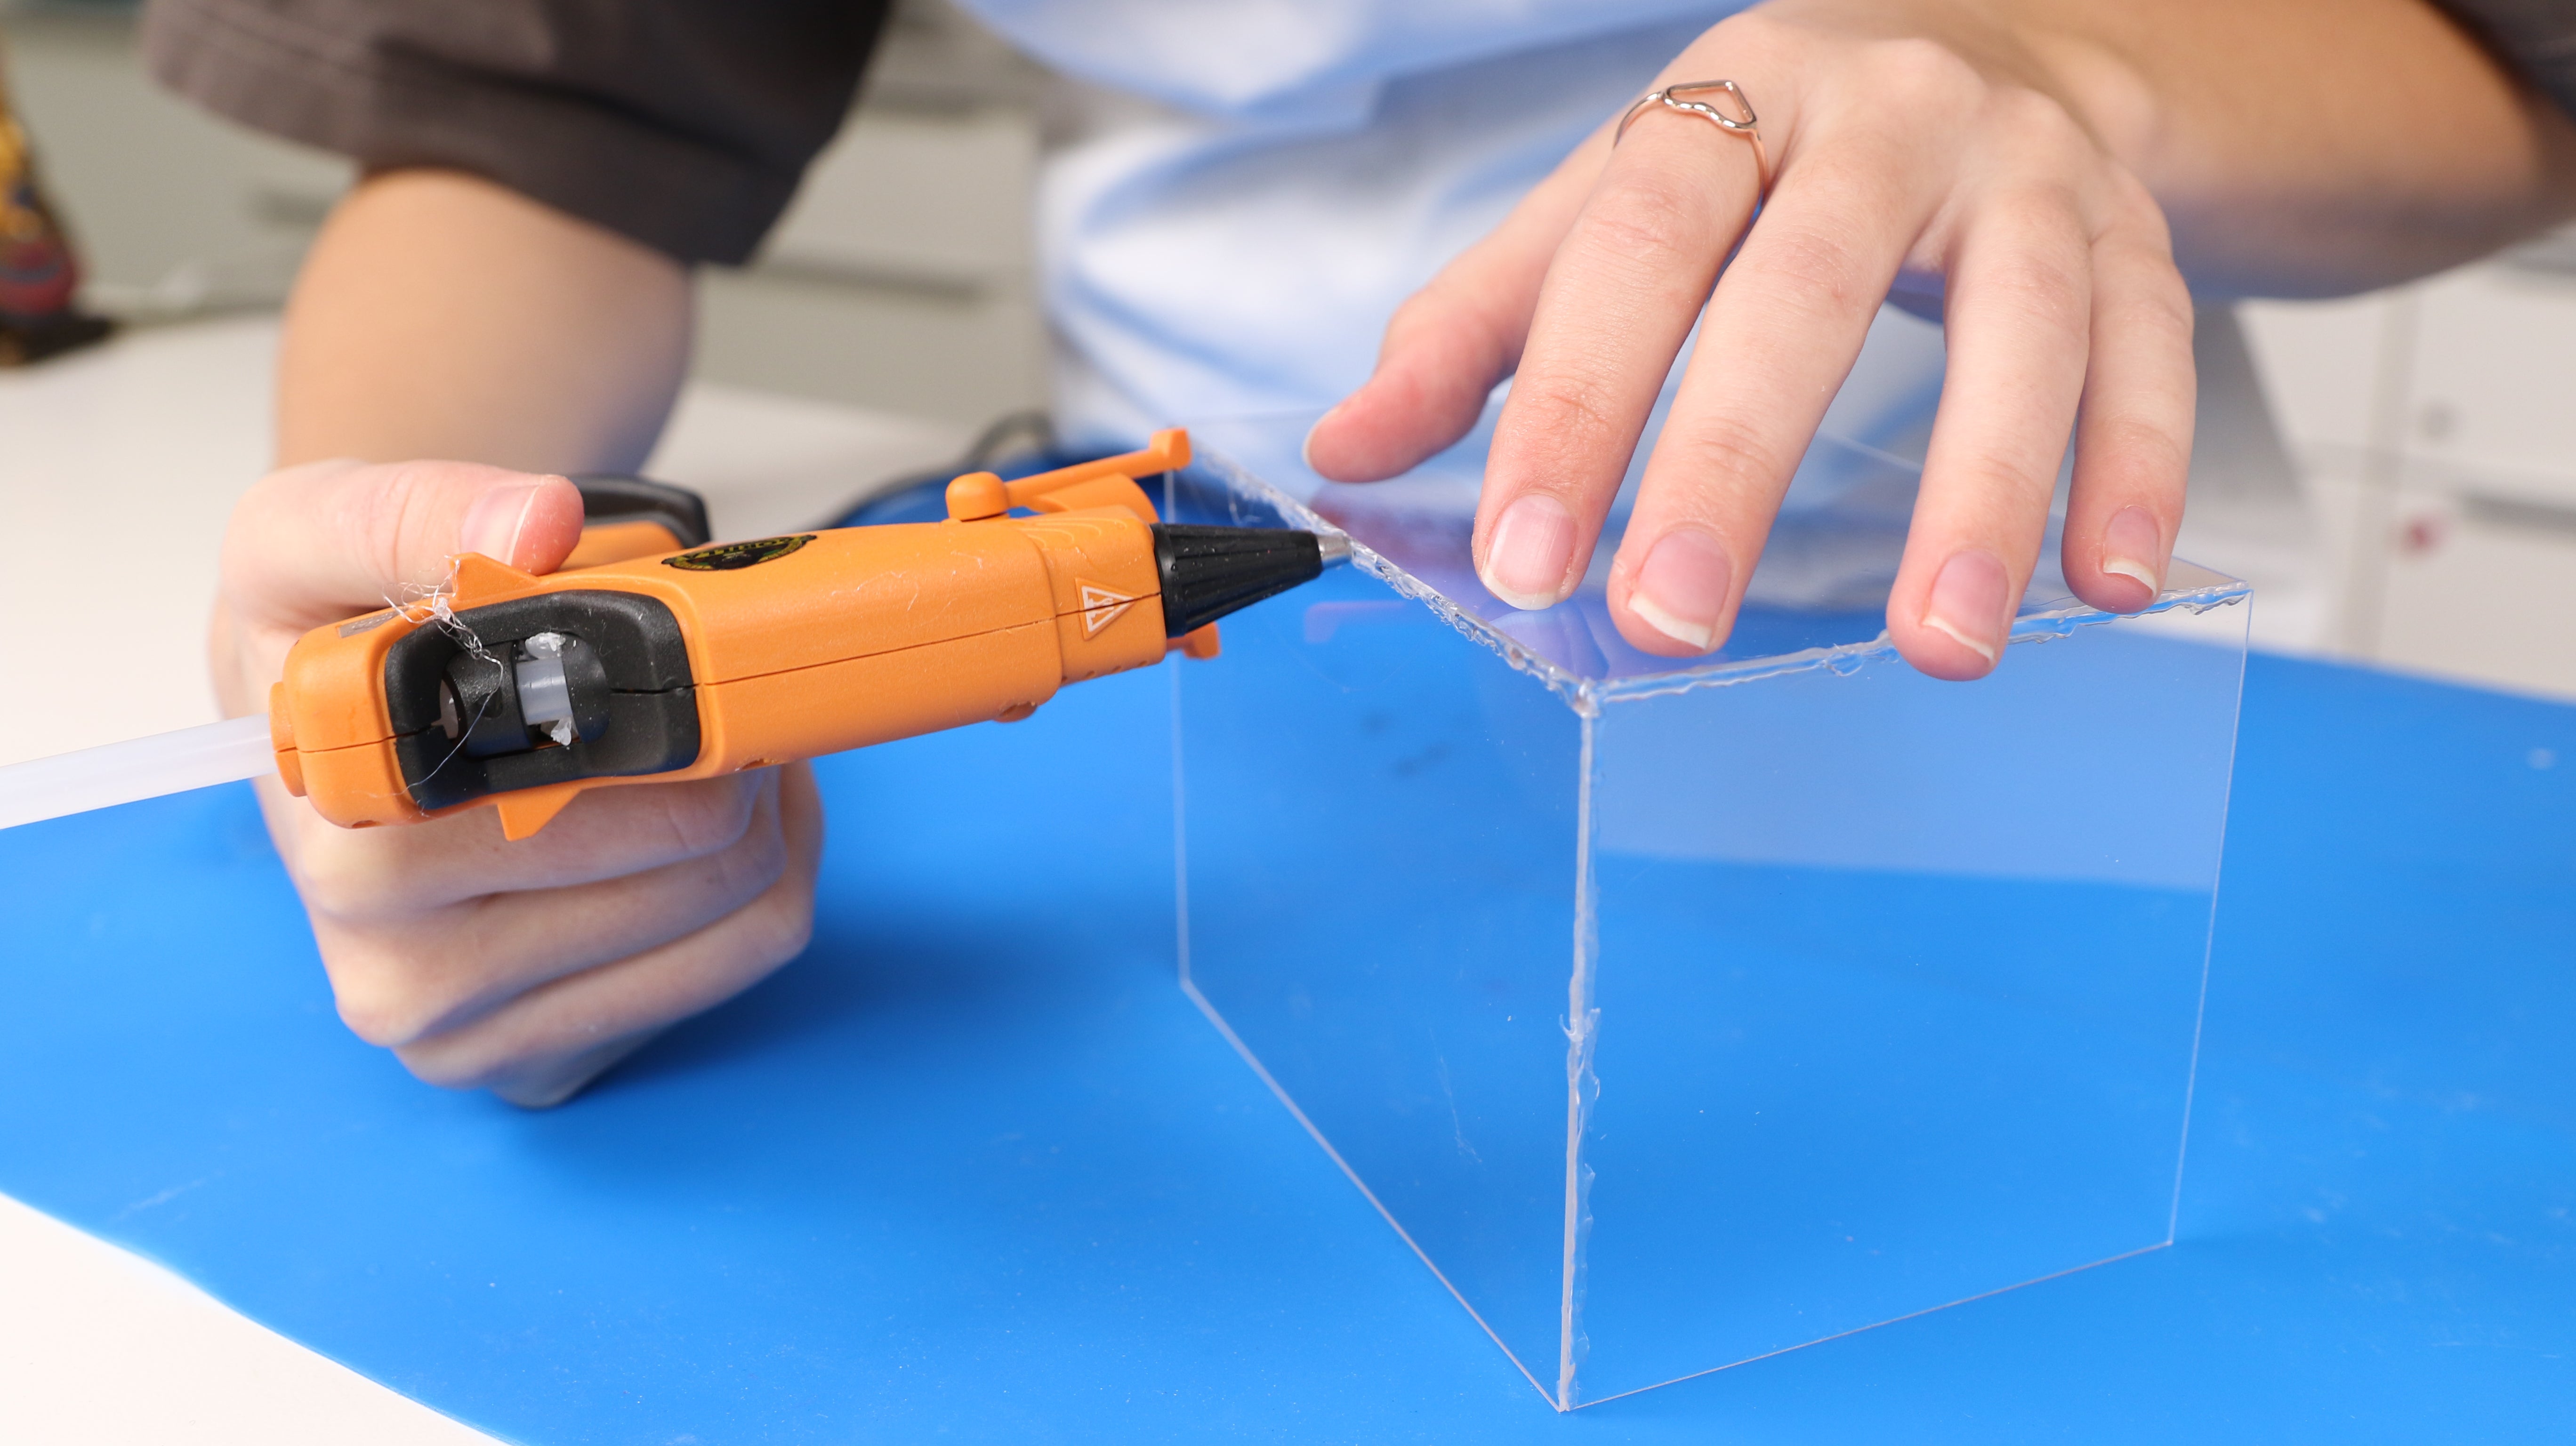 Build A Box For Mold Making - Ensure that the glue is thoroughly applied along the seams